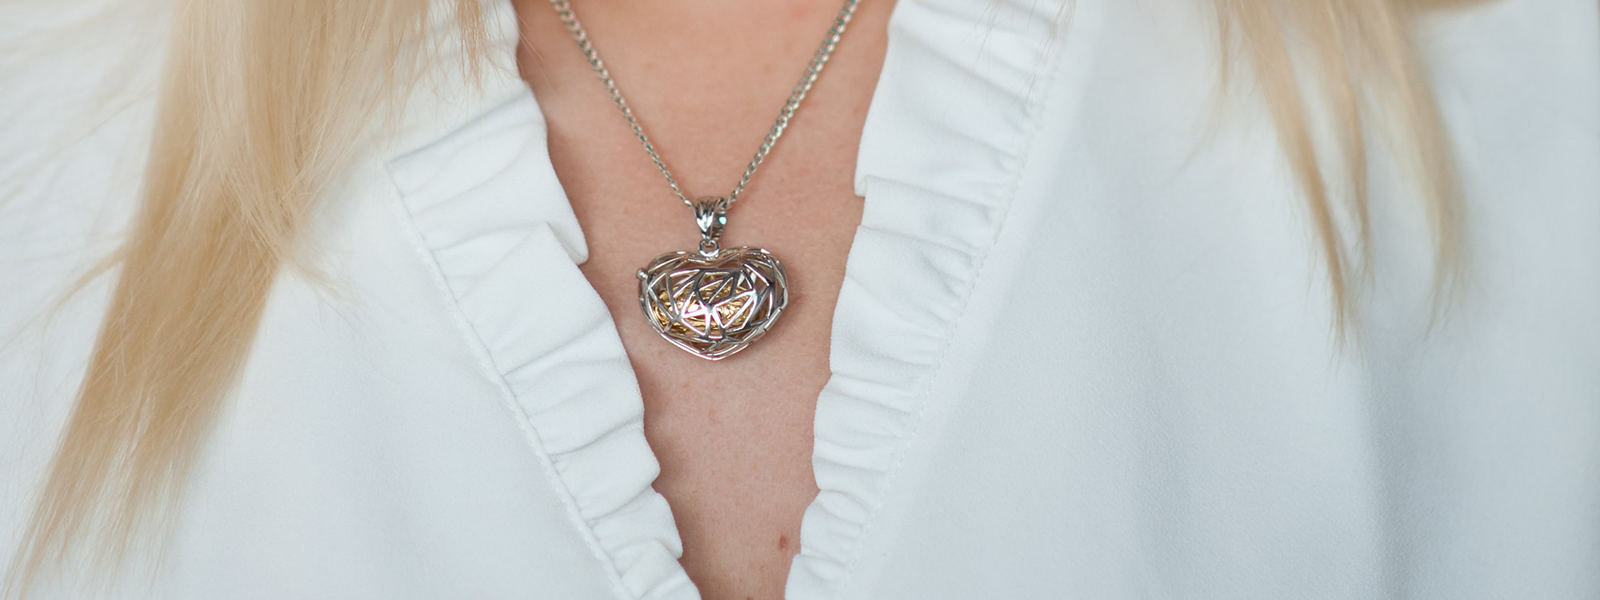 A necklace holding cremated remains